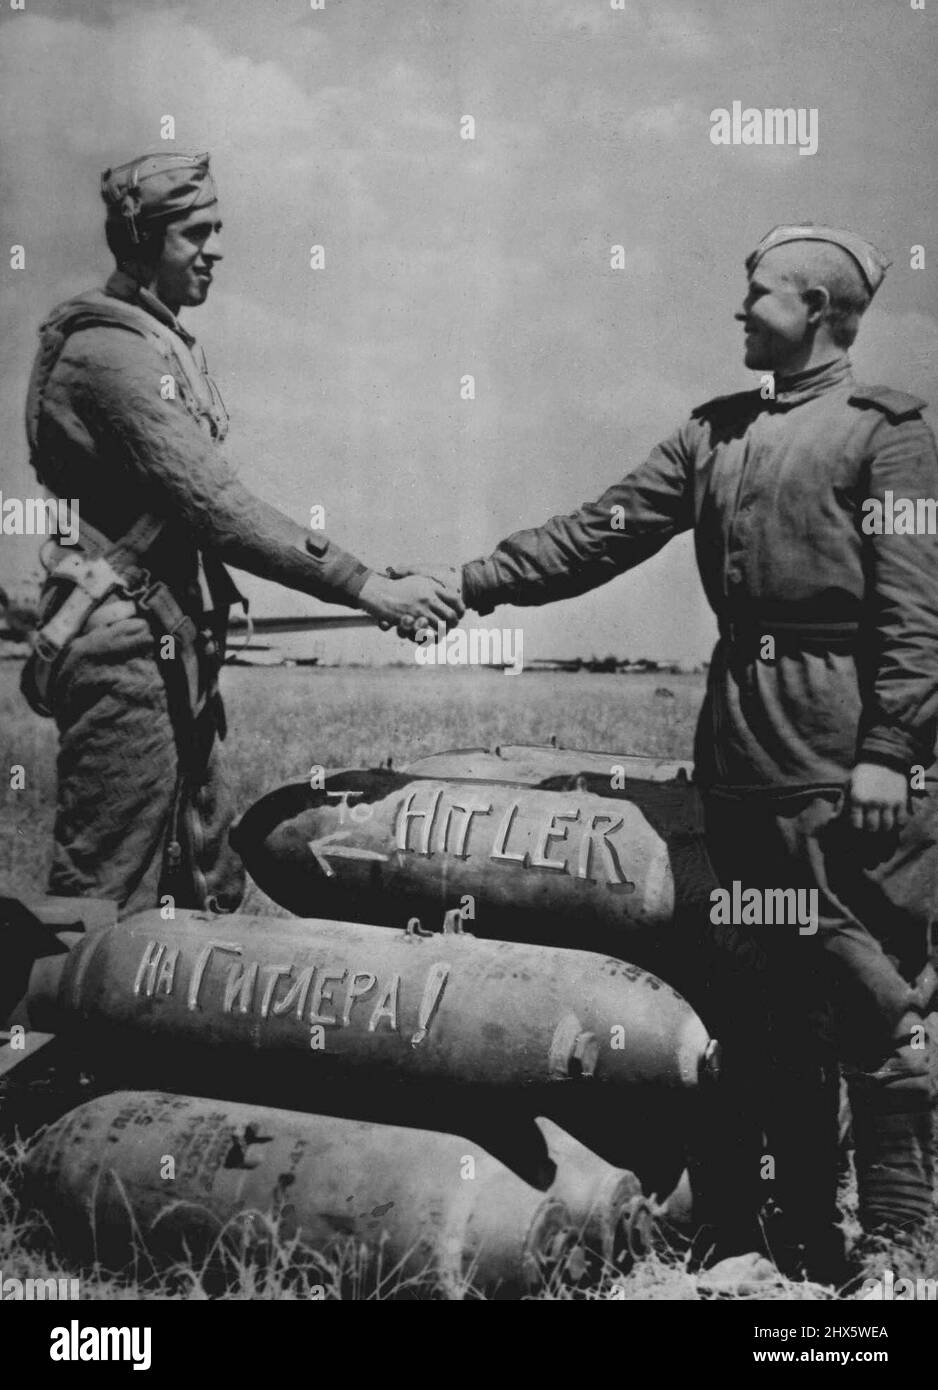 American And Russian Soldiers Shake Hands Over Bombs For The Enemy -- At an air base in Russia used by American aircraft, a U.S. and Red Army soldier shake hands over a pile of bombs addressed to the enemy. The Russian words 'to Hitler' are painted on a bomb under one bearing the English spelling American aircraft have used bases in Russia since June 2, 1944, when Flying Fortresses left a base in Italy, bombed German targets in Rumania, and combined to new airfields in Russia prepared to receive Stock Photo